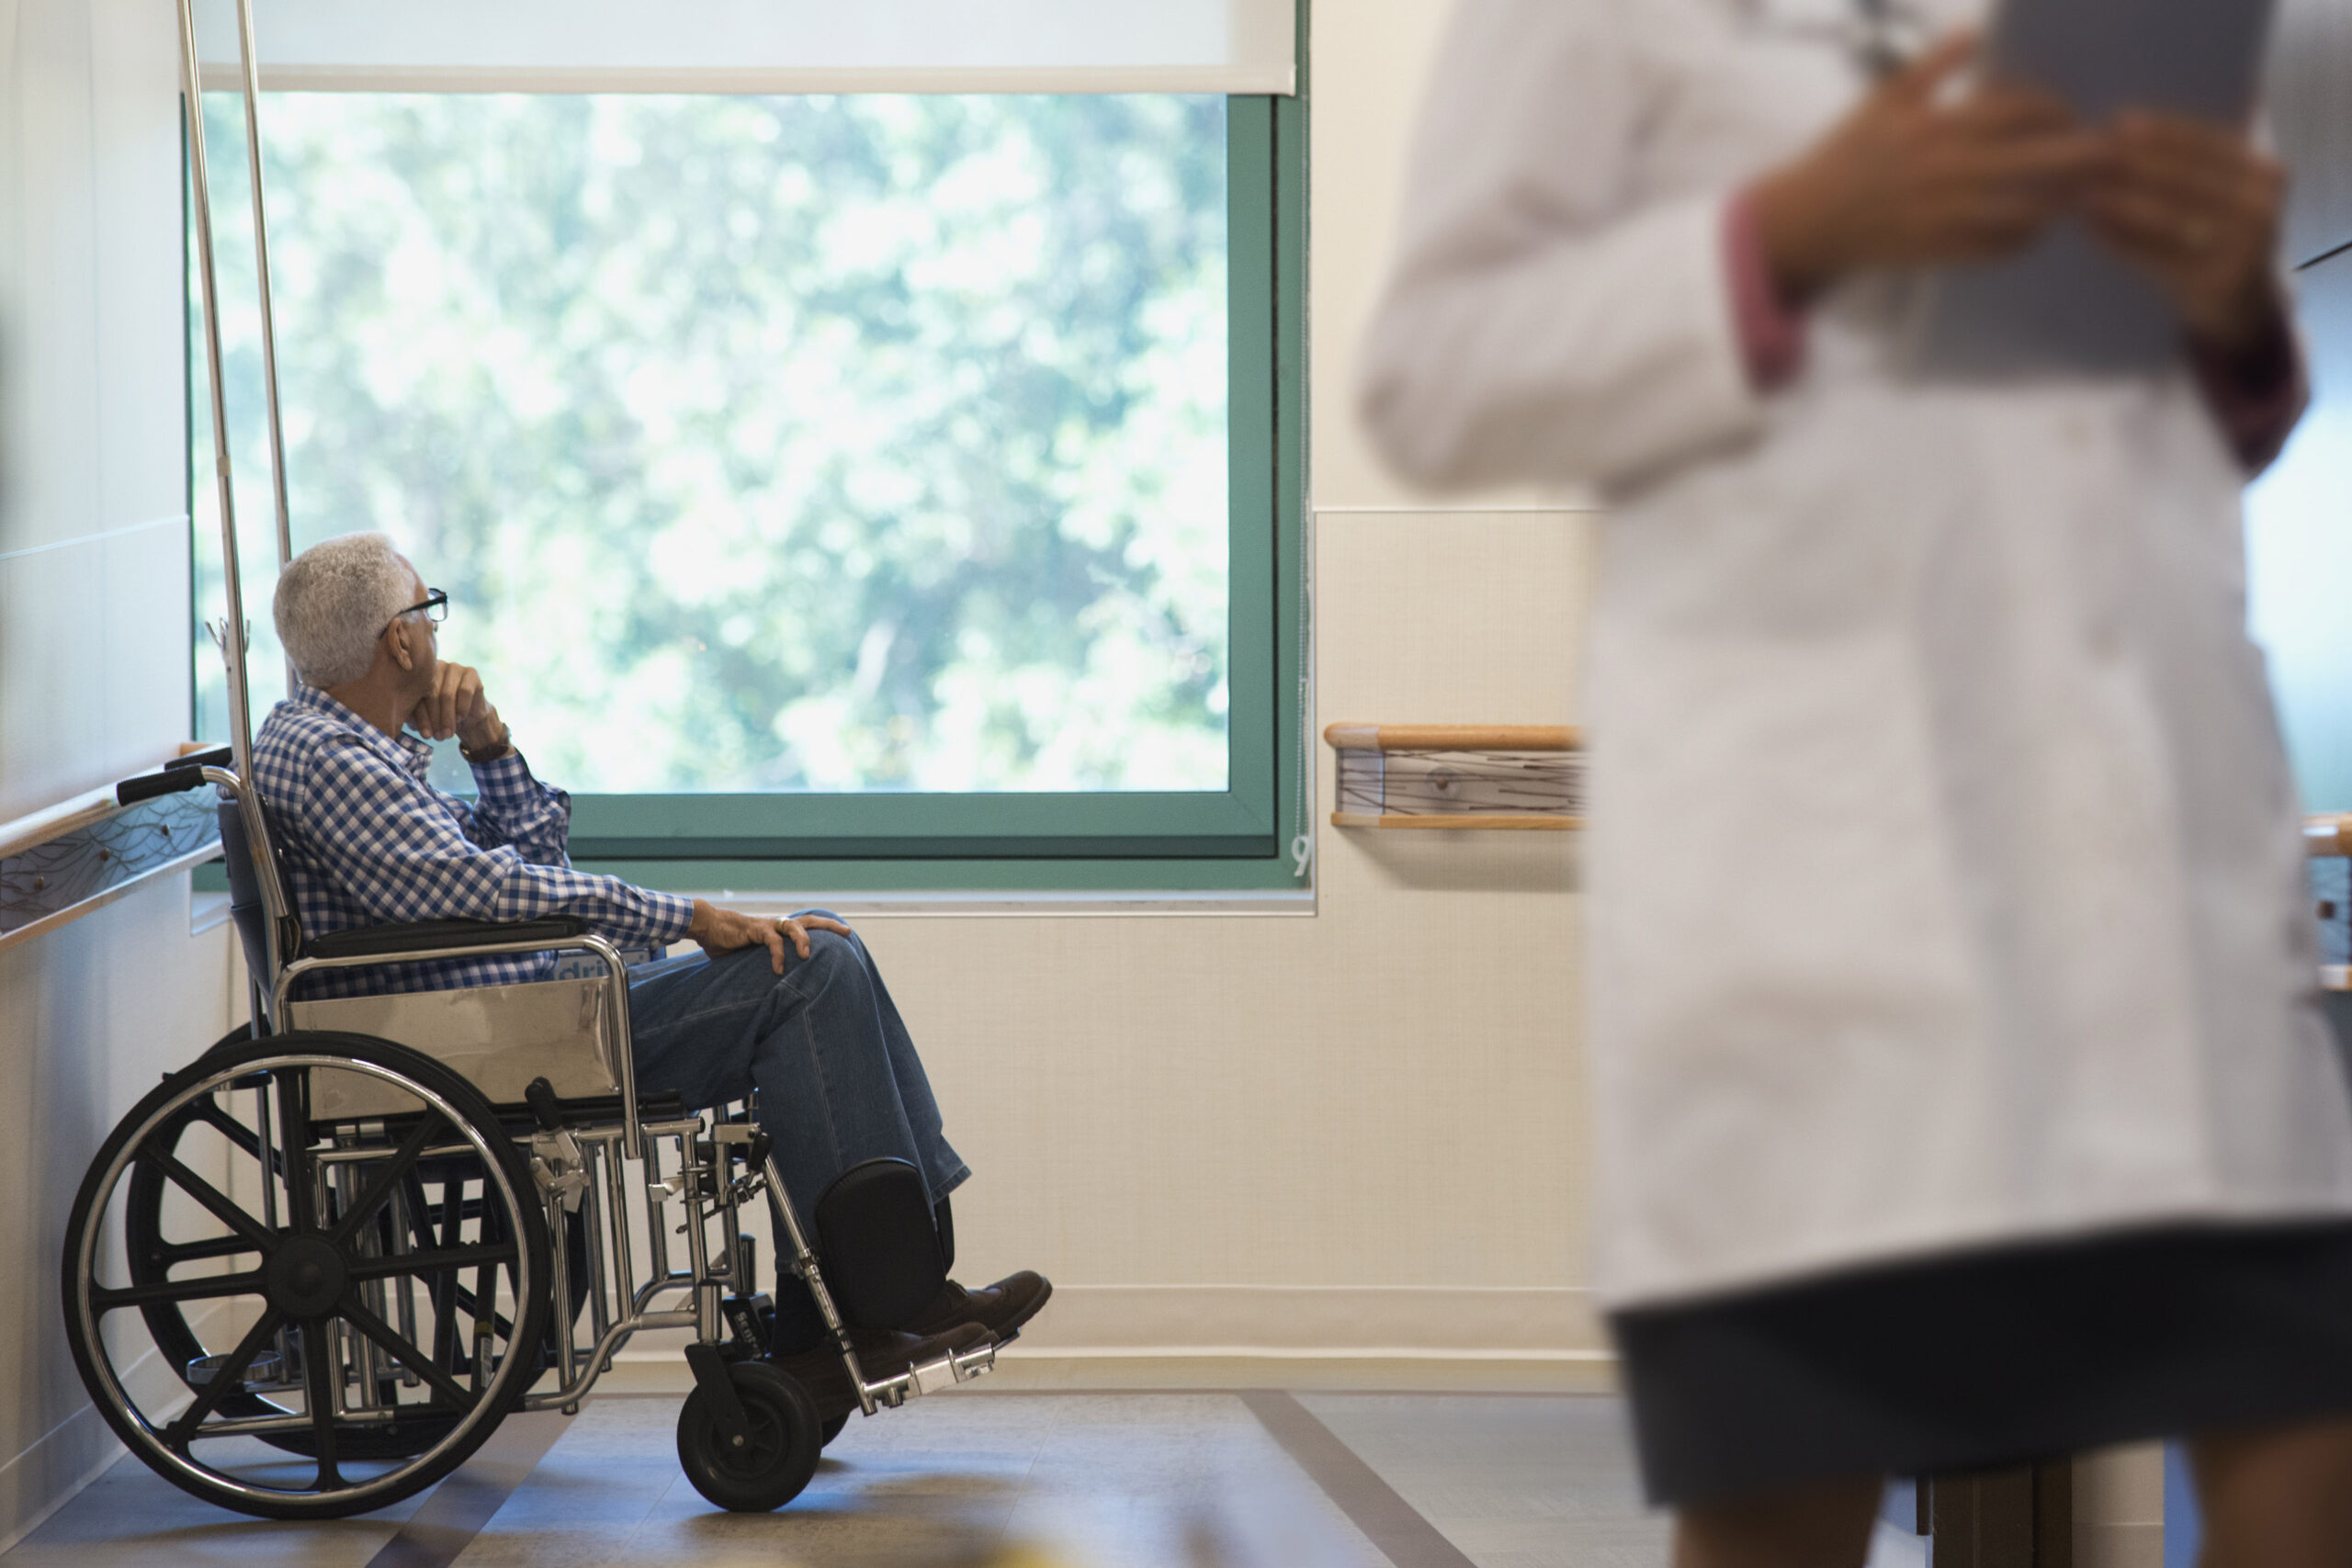 An elderly man is sitting in a wheelchair in a hospital room. A health care worker is visible in the foreground of the image.